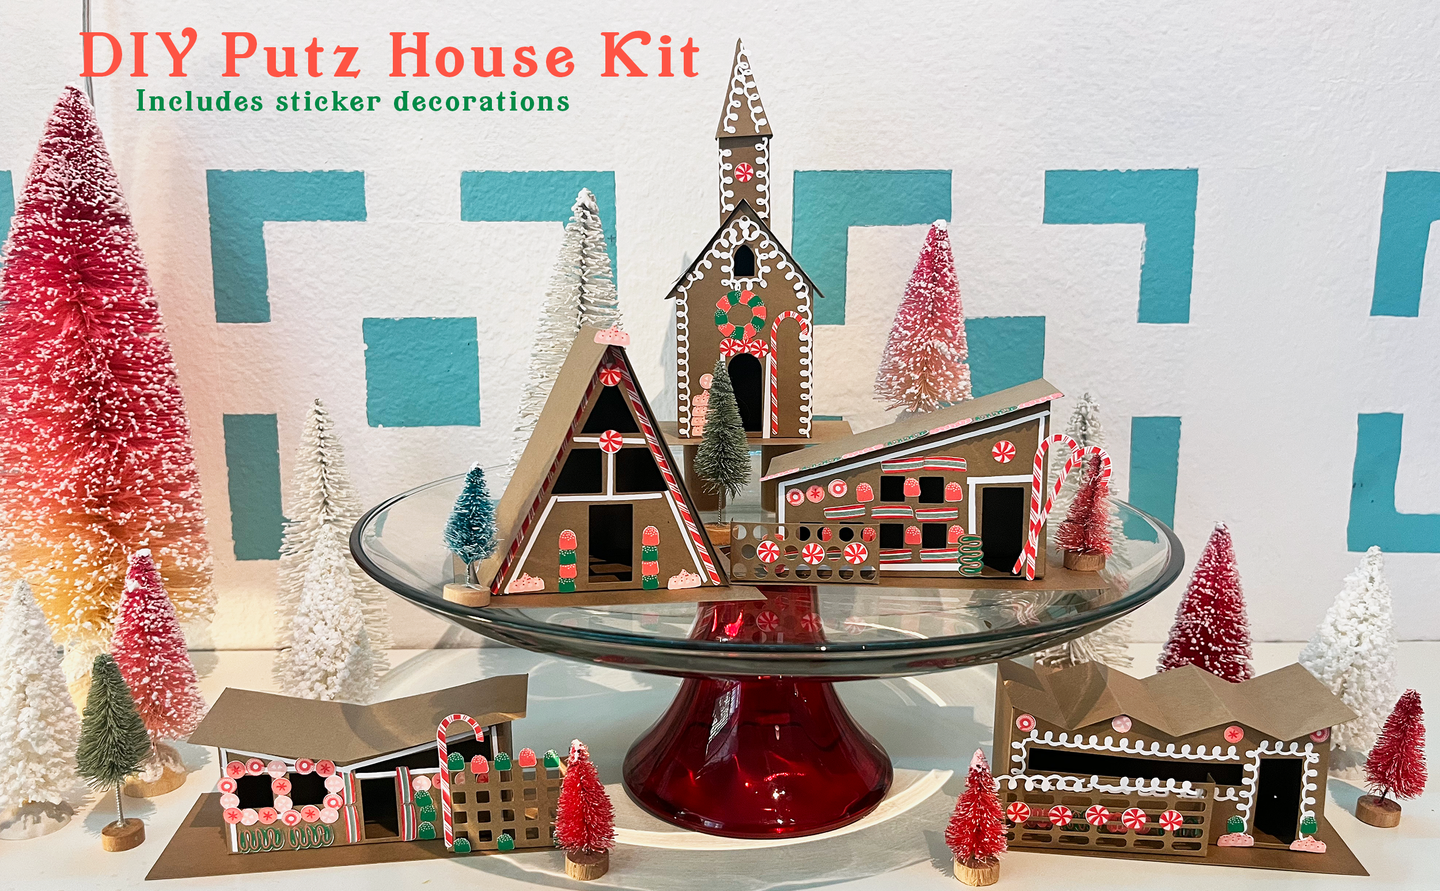 Mod Putz Gingerbread Houses DIY Kit Set of 5 Undecorated and Sticker Sheet for Decorating